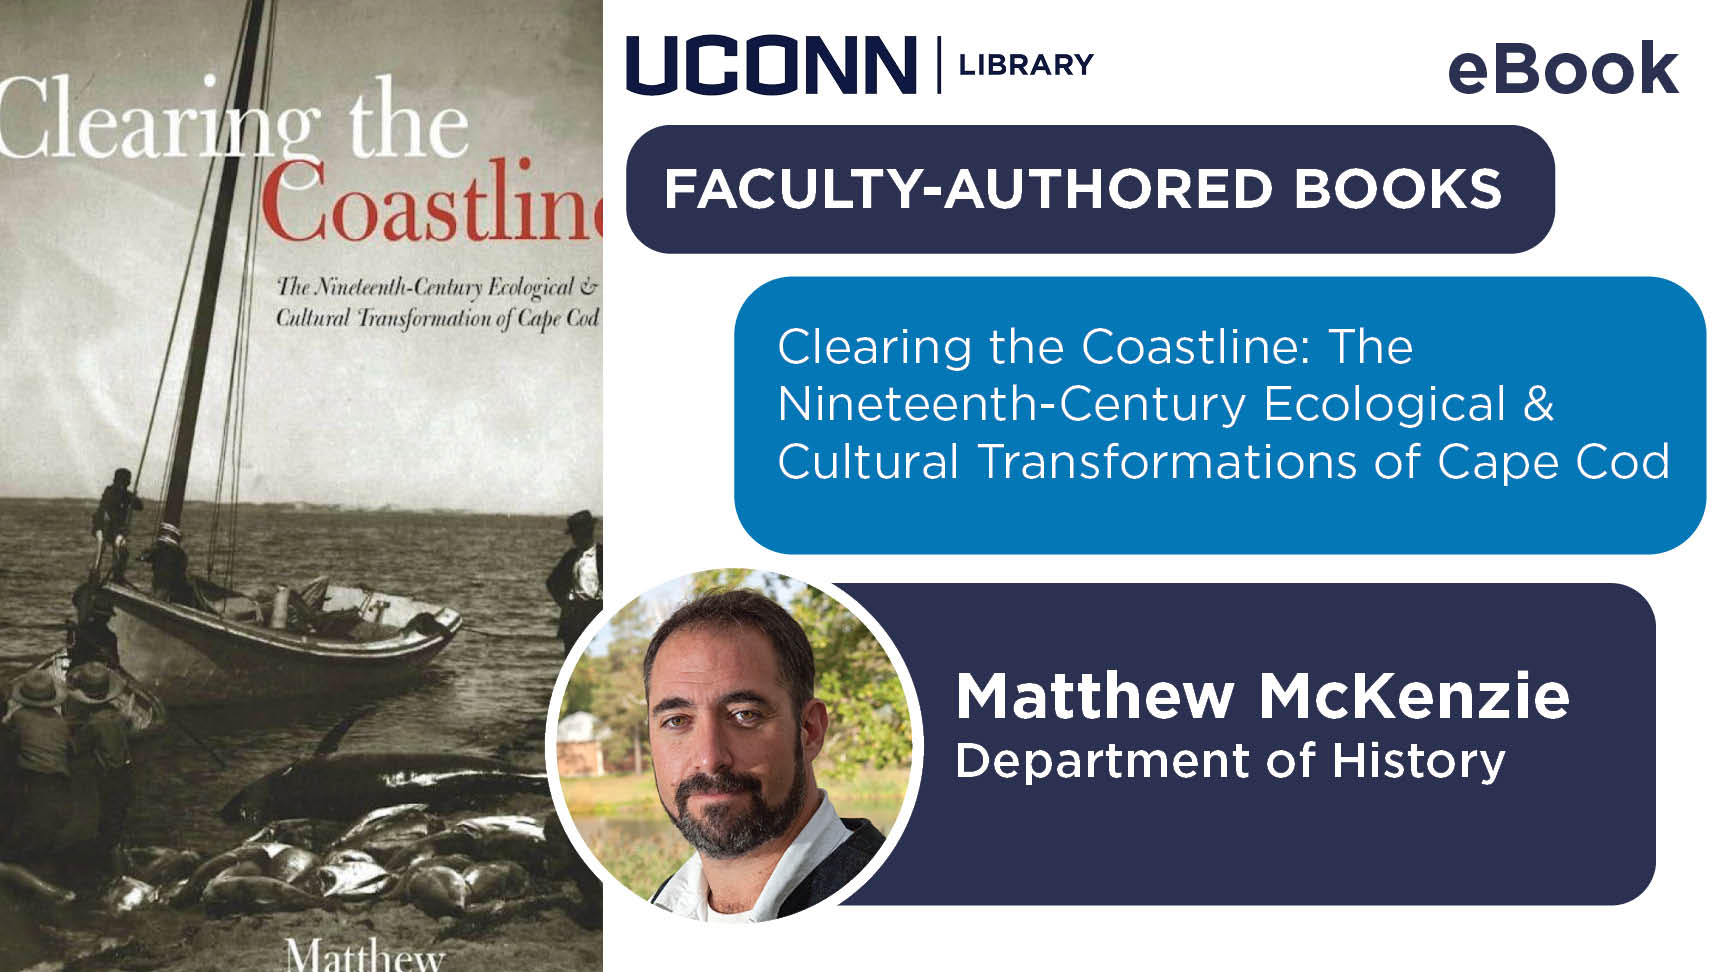 UConn Library, eBook, FACULTY-AUTHORED BOOKS, Clearing the Coastline: The Nineteenth-Century Ecological & Cultural Transformations of Cape Cod, Matthew McKenzie Department of History